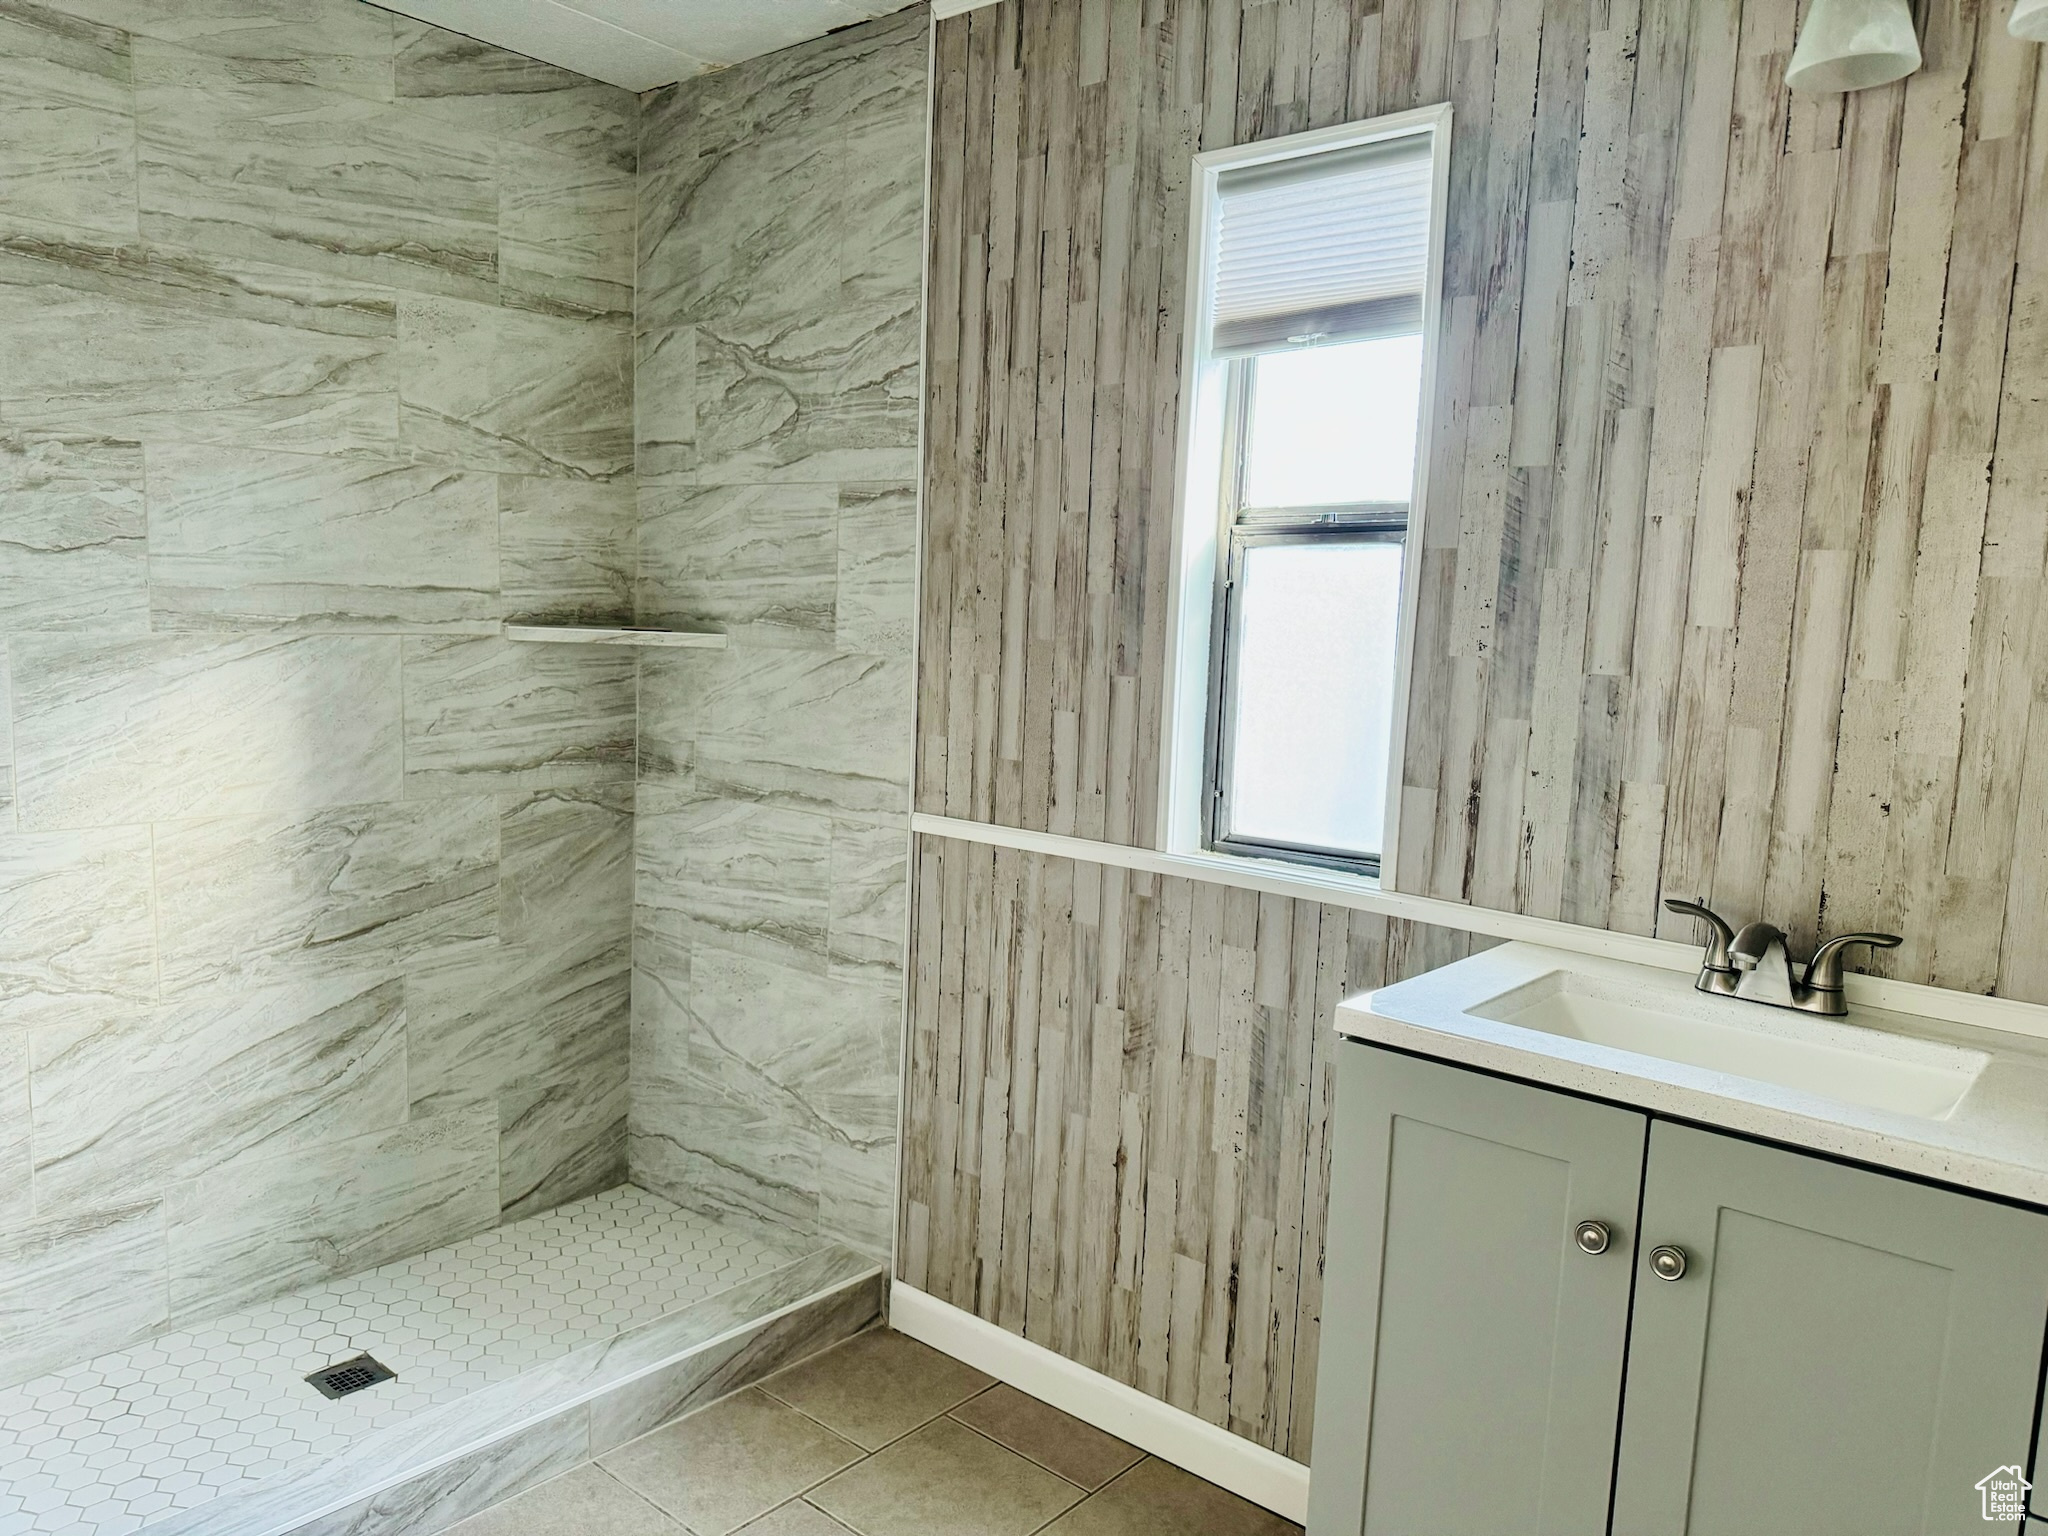 Bathroom featuring tile floors, vanity, and a tile shower